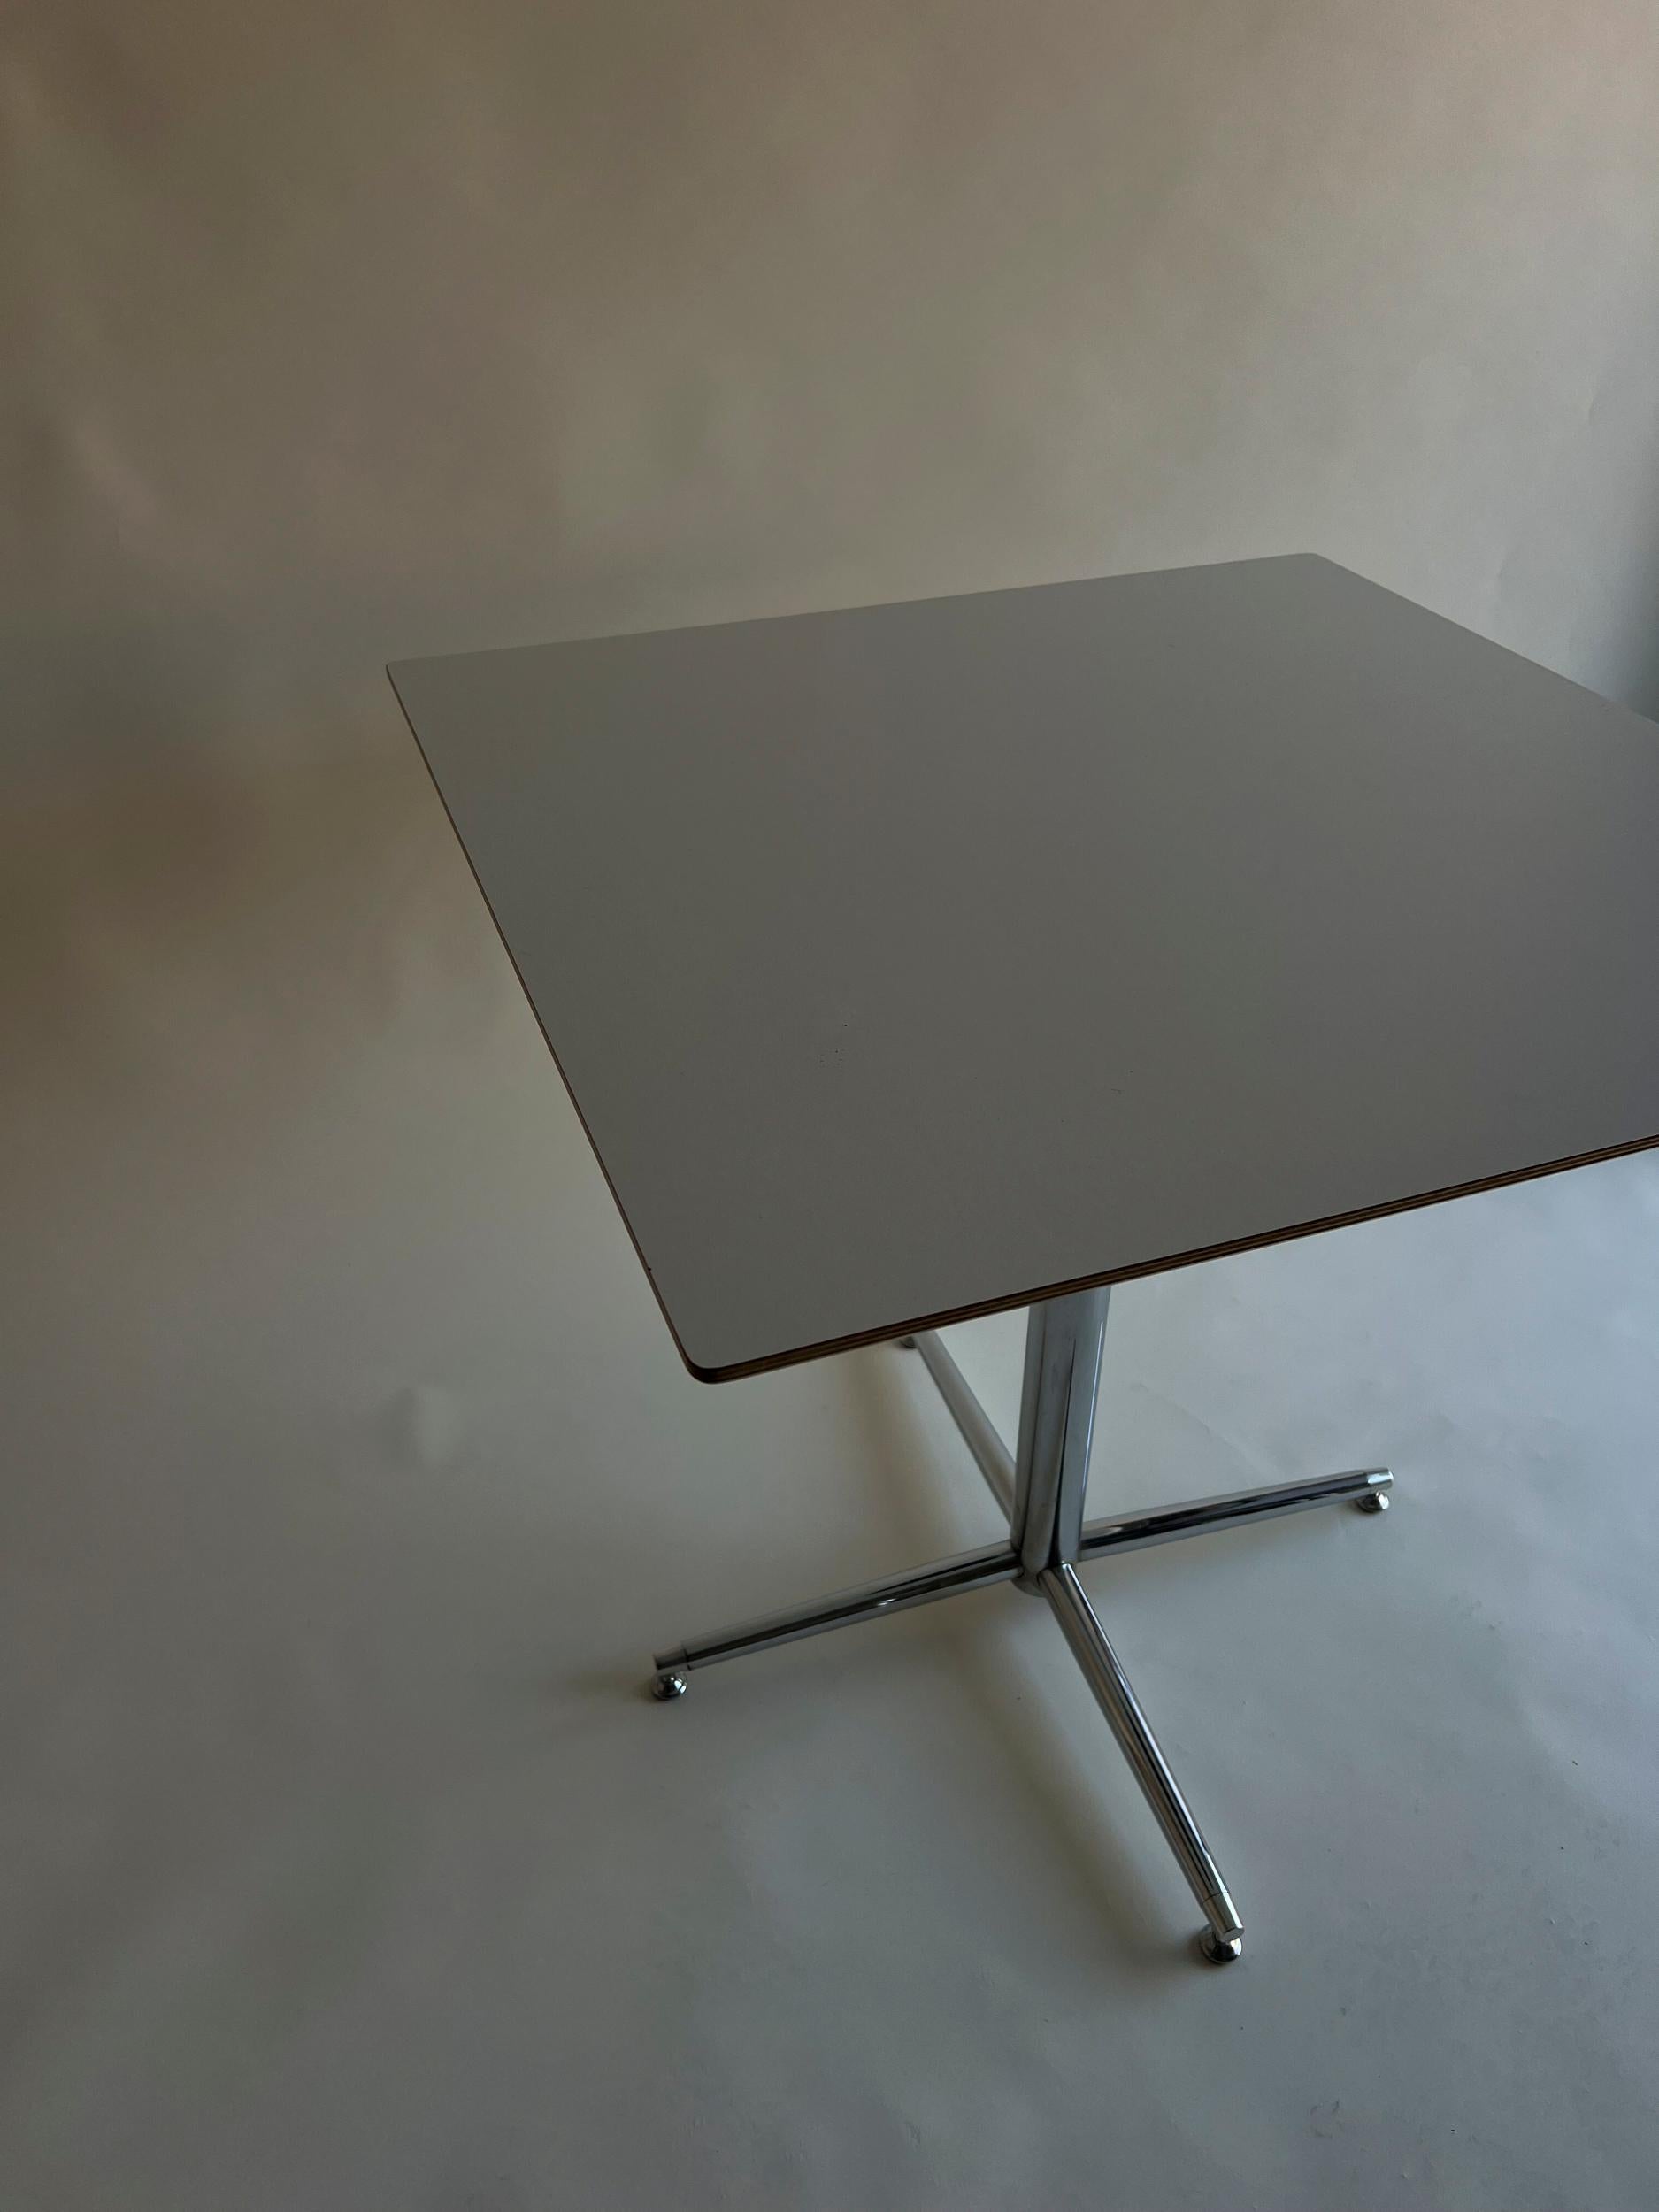 Not marked but possibly Artifort by the looks of the sturdy table top. A very solid and sturdy table perfect for small areas.